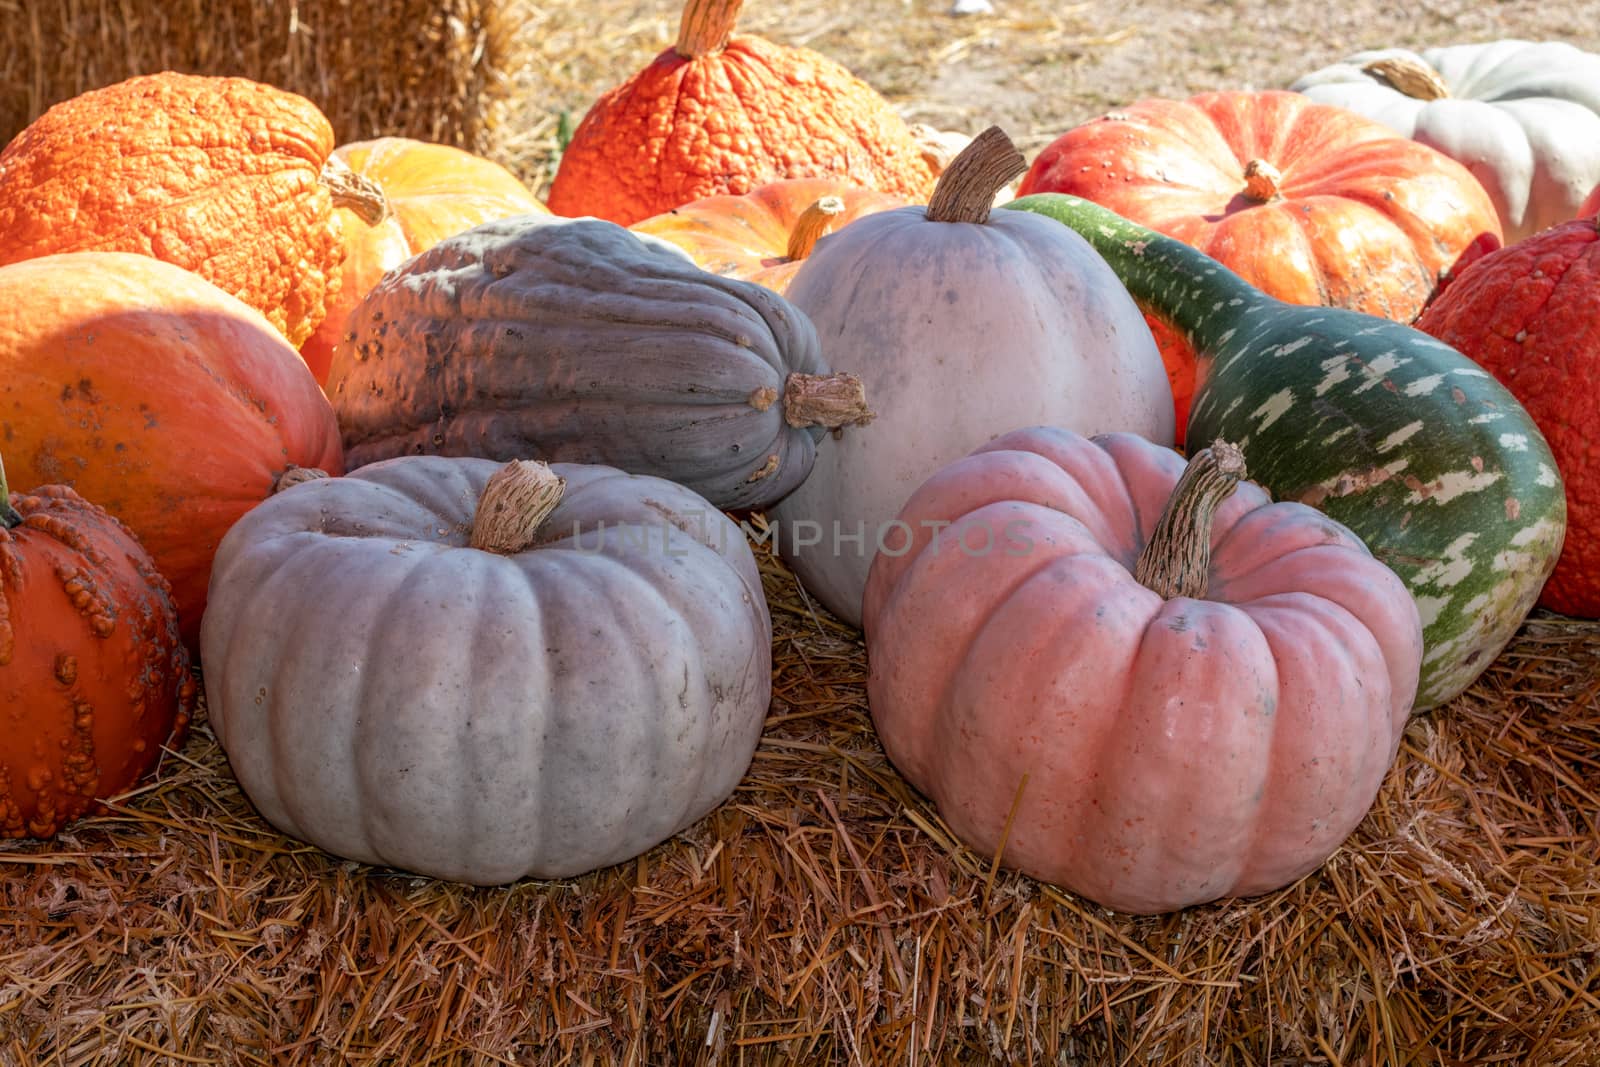 Front View of Farmers Market Ground of pumpkins on an Hay bale by gena_wells